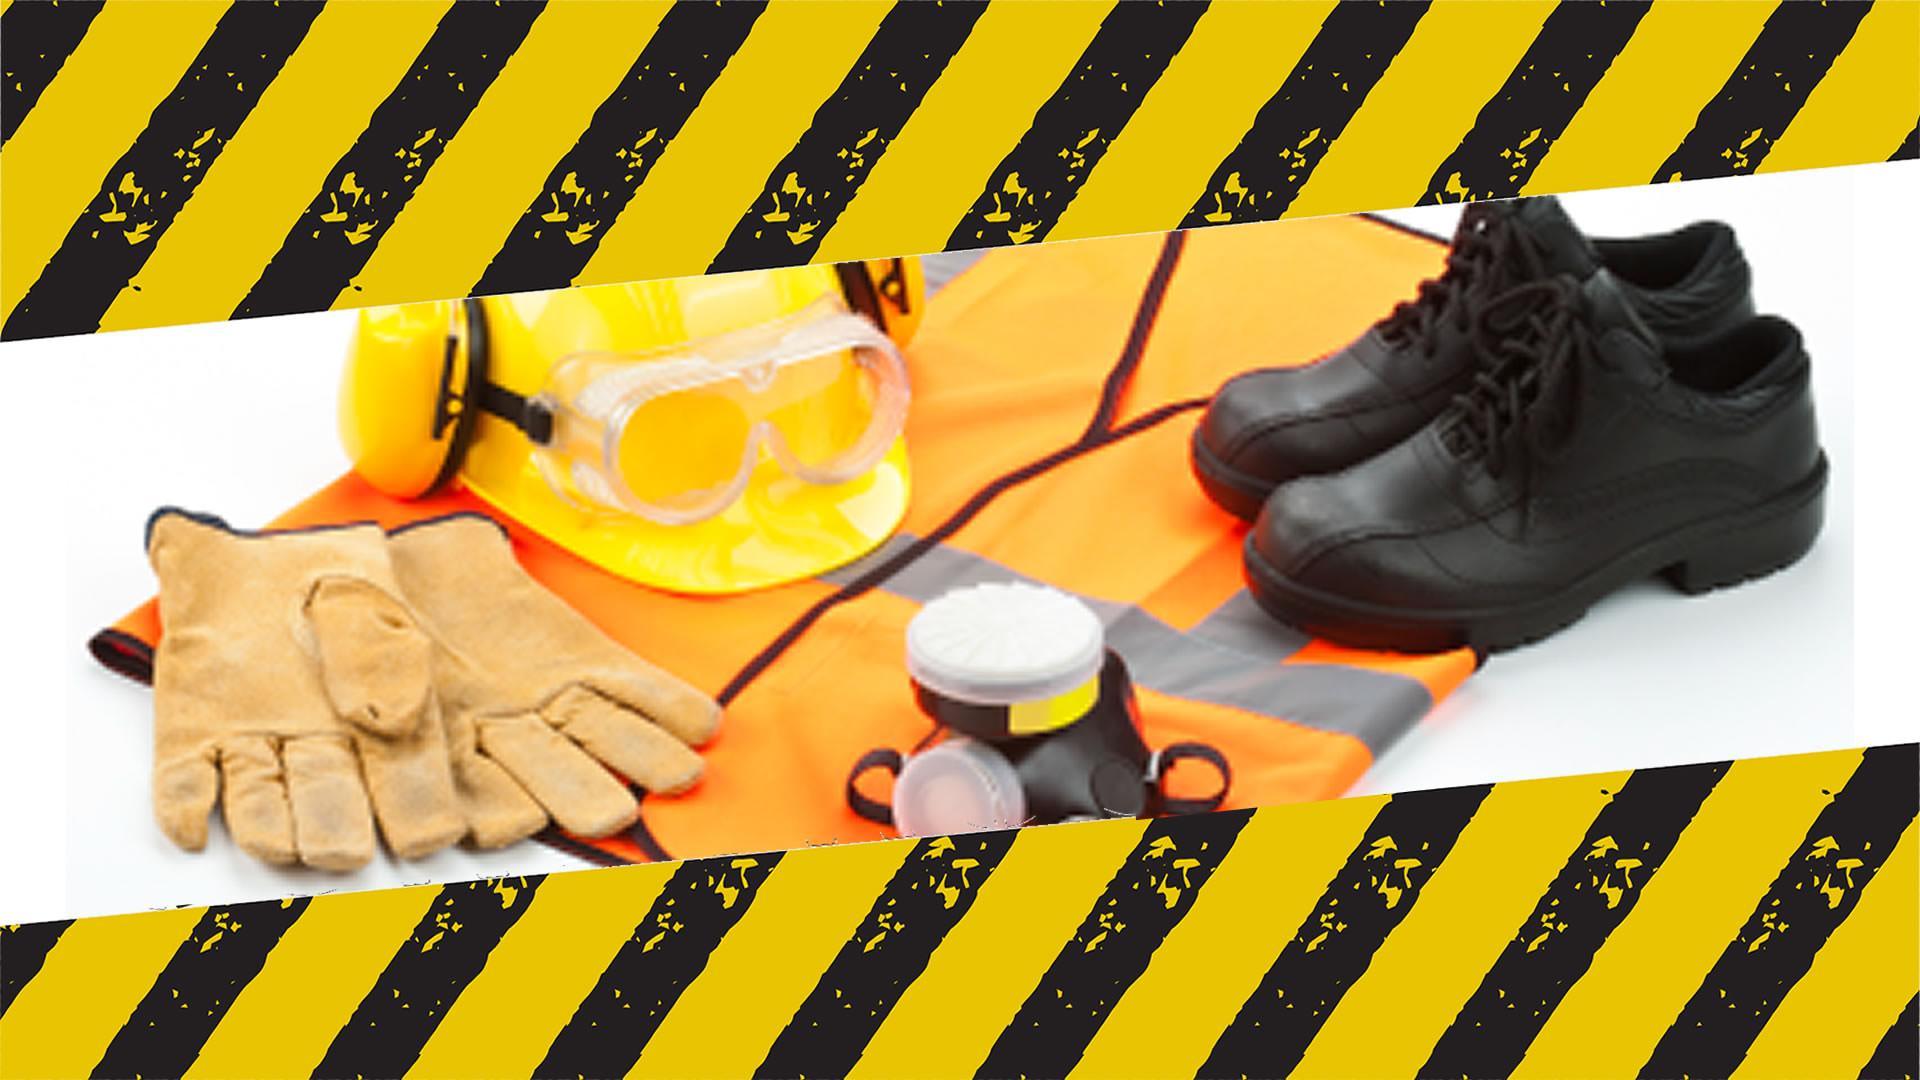 Ensuring Safety: Vital Health & Safety Training - CareerAlley